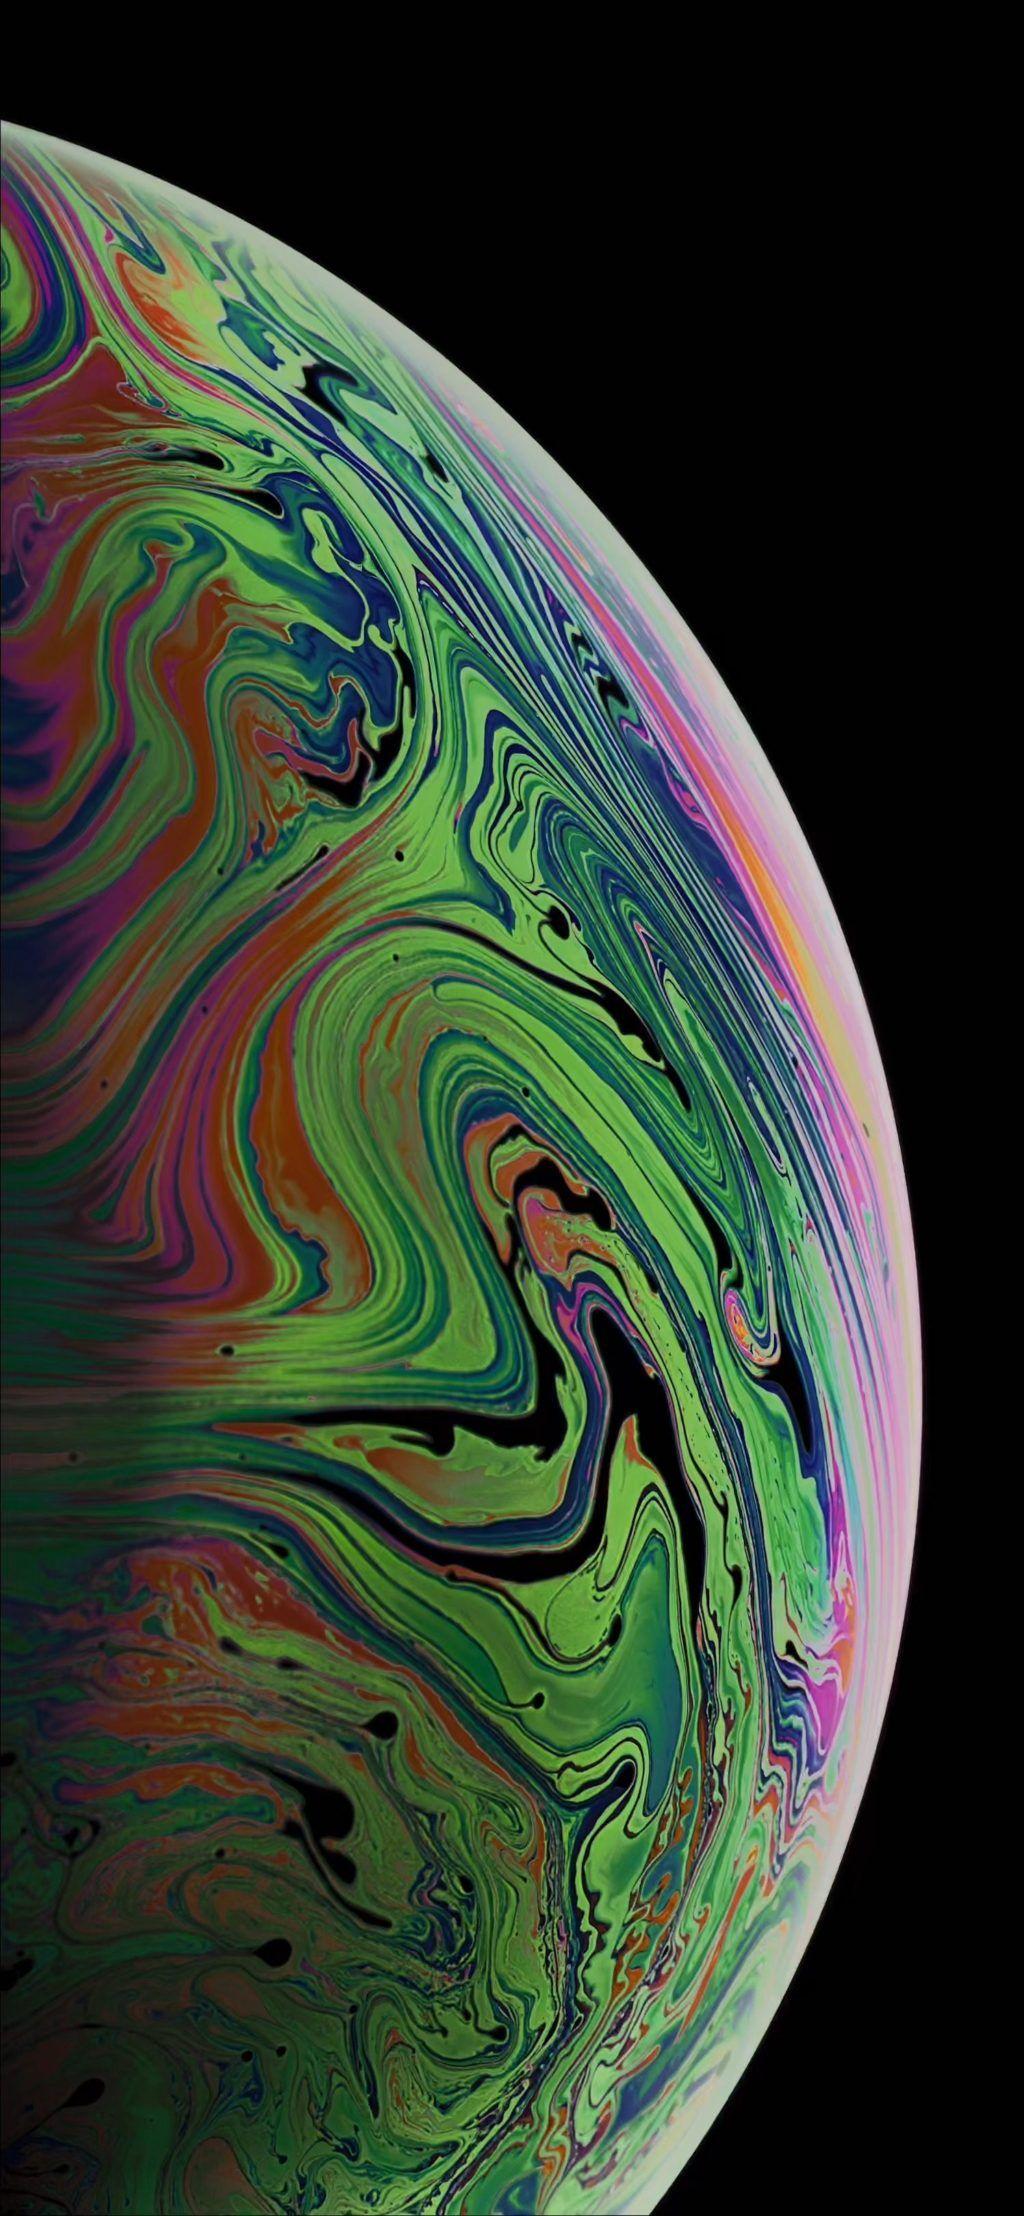 Download iPhone XS and iPhone XS Max Wallpapers